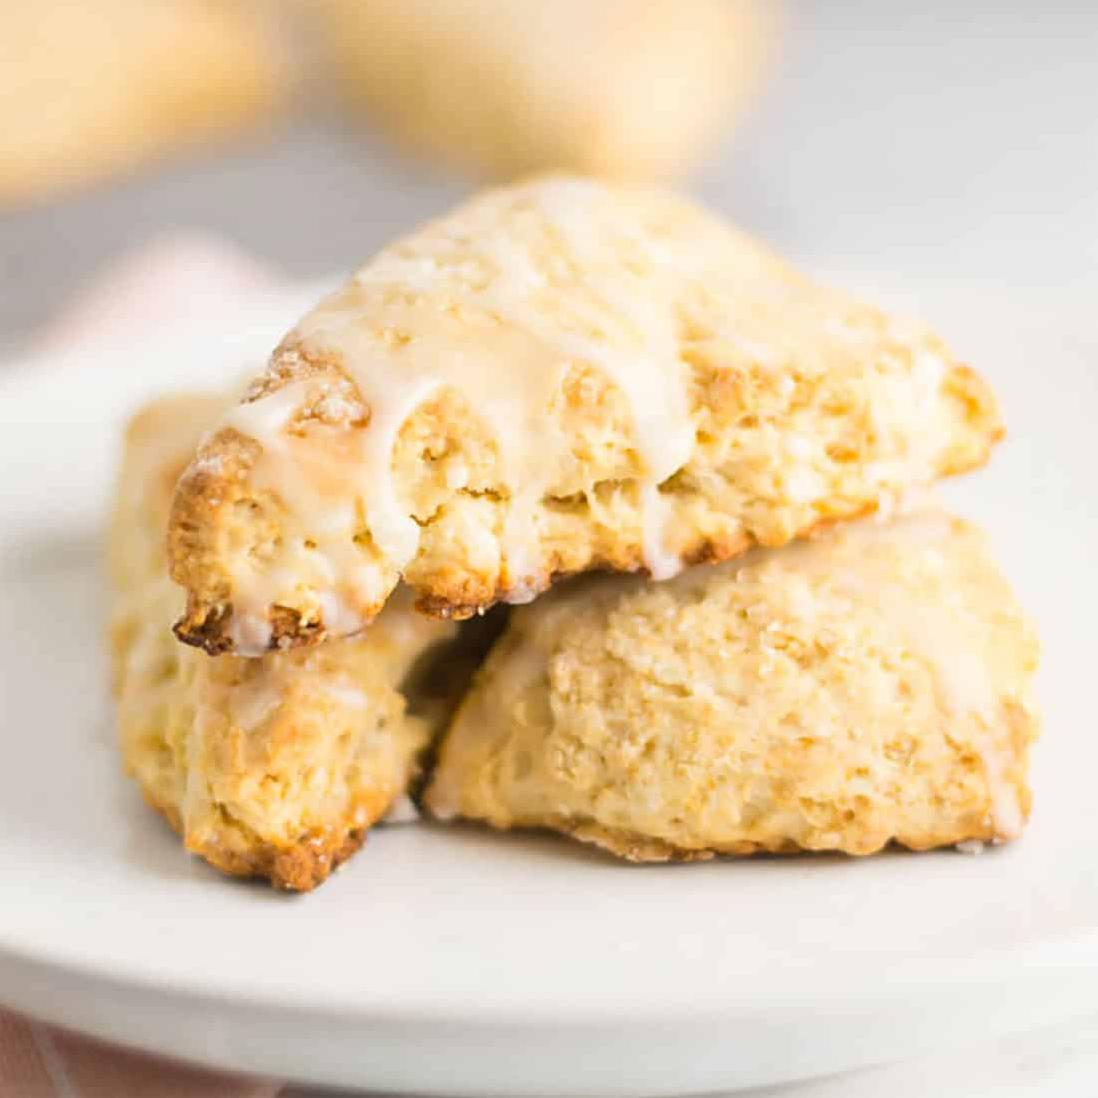  These scones are packed with zingy lemony goodness that will tantalize your taste buds.